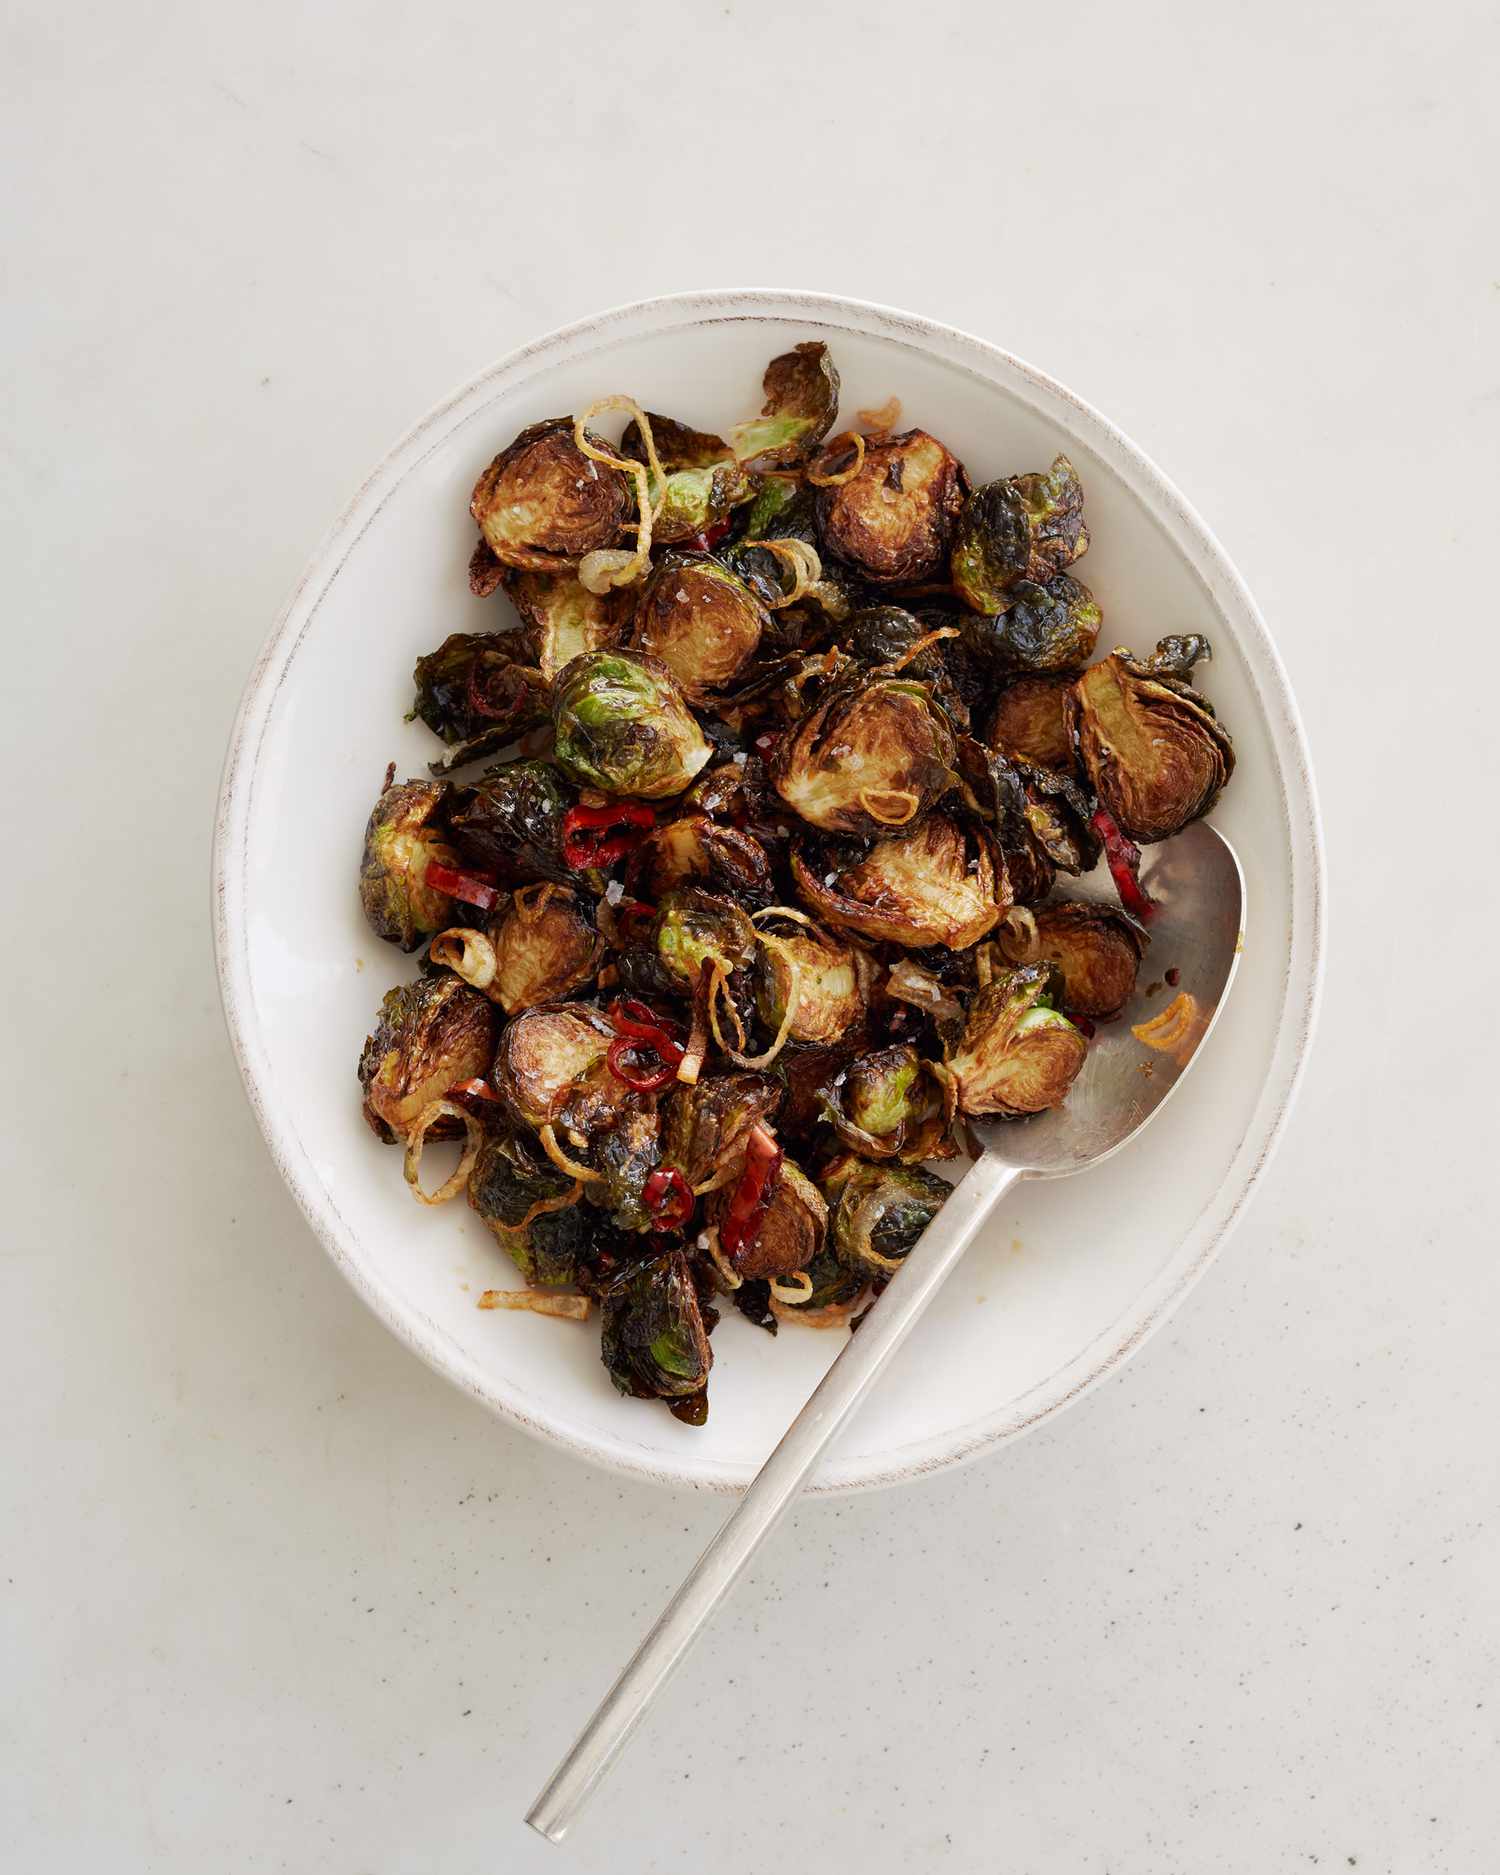 fried-brussels-sprouts-194-ms-6190441.jpg